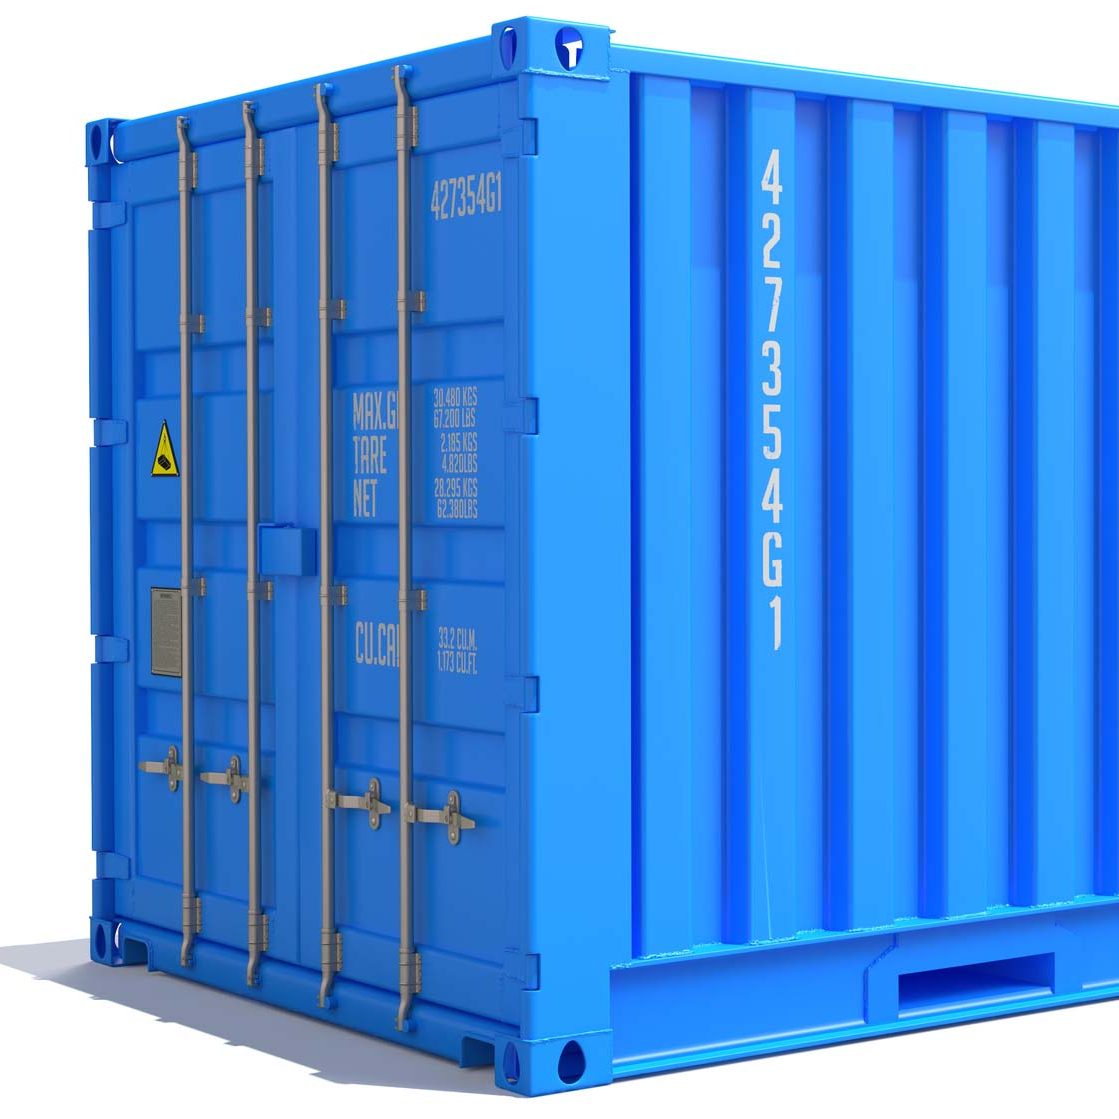 Blue Cargo Container Isolated on White.